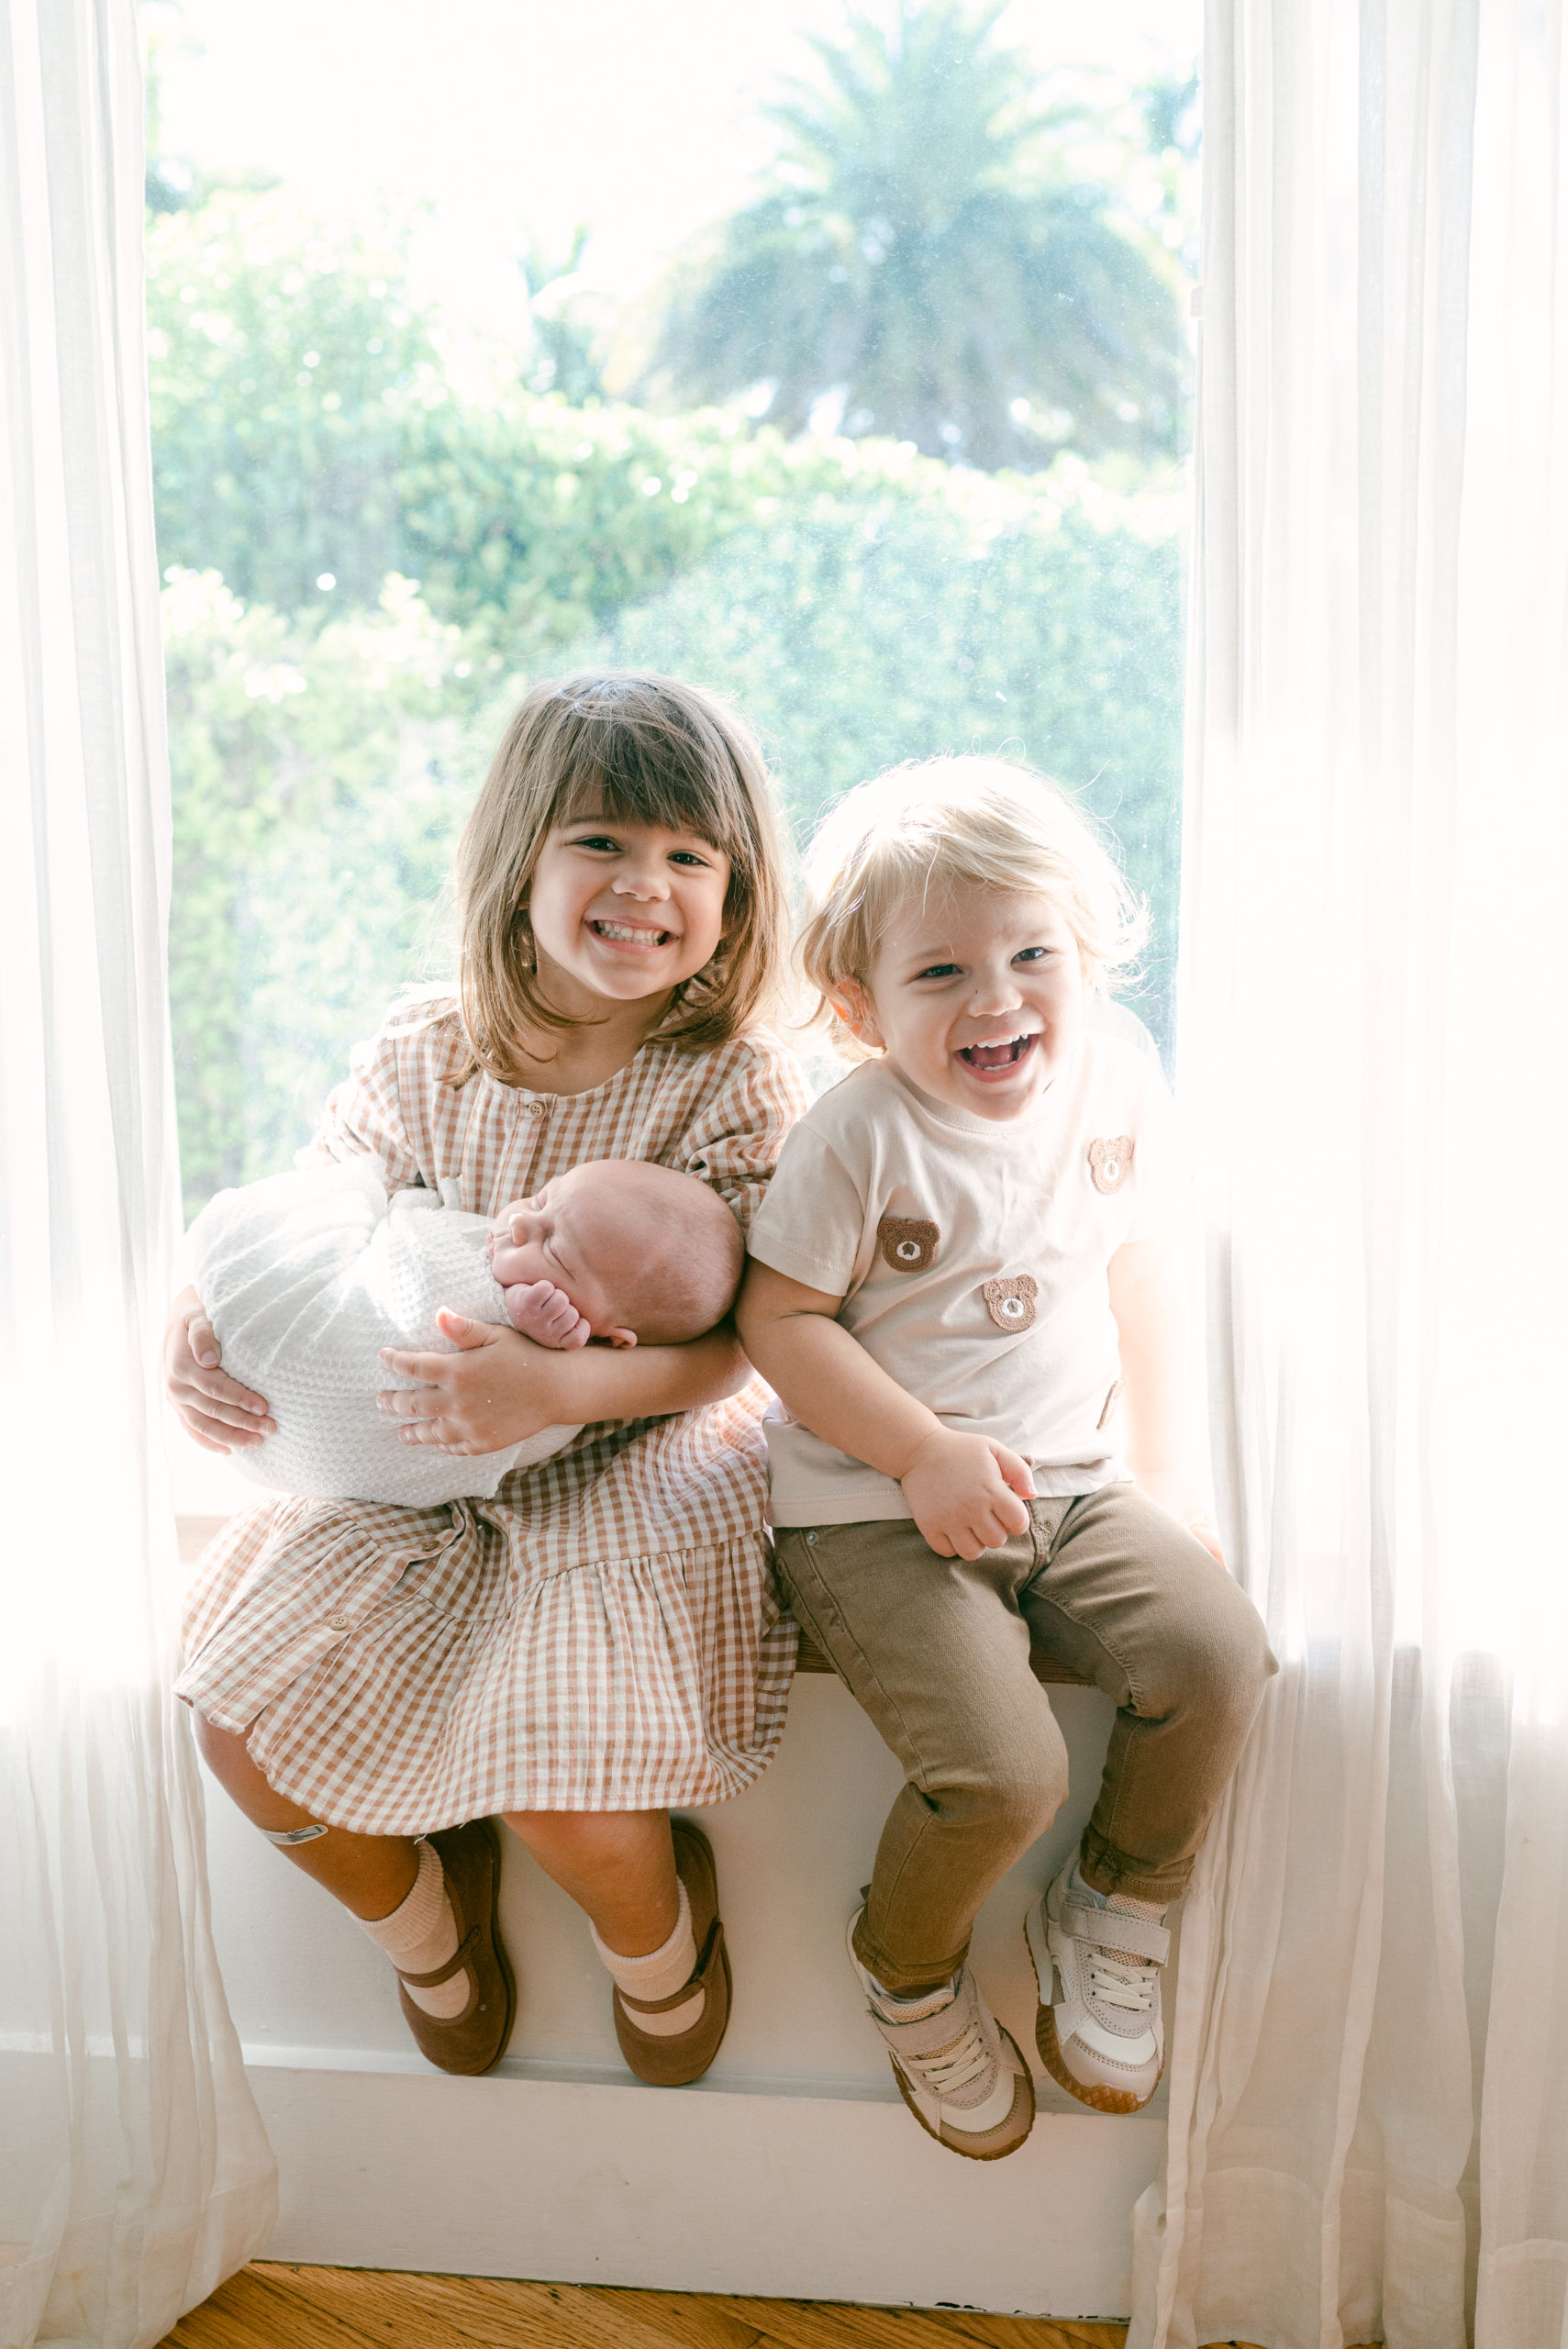 At Home Newborn Photos with Siblings